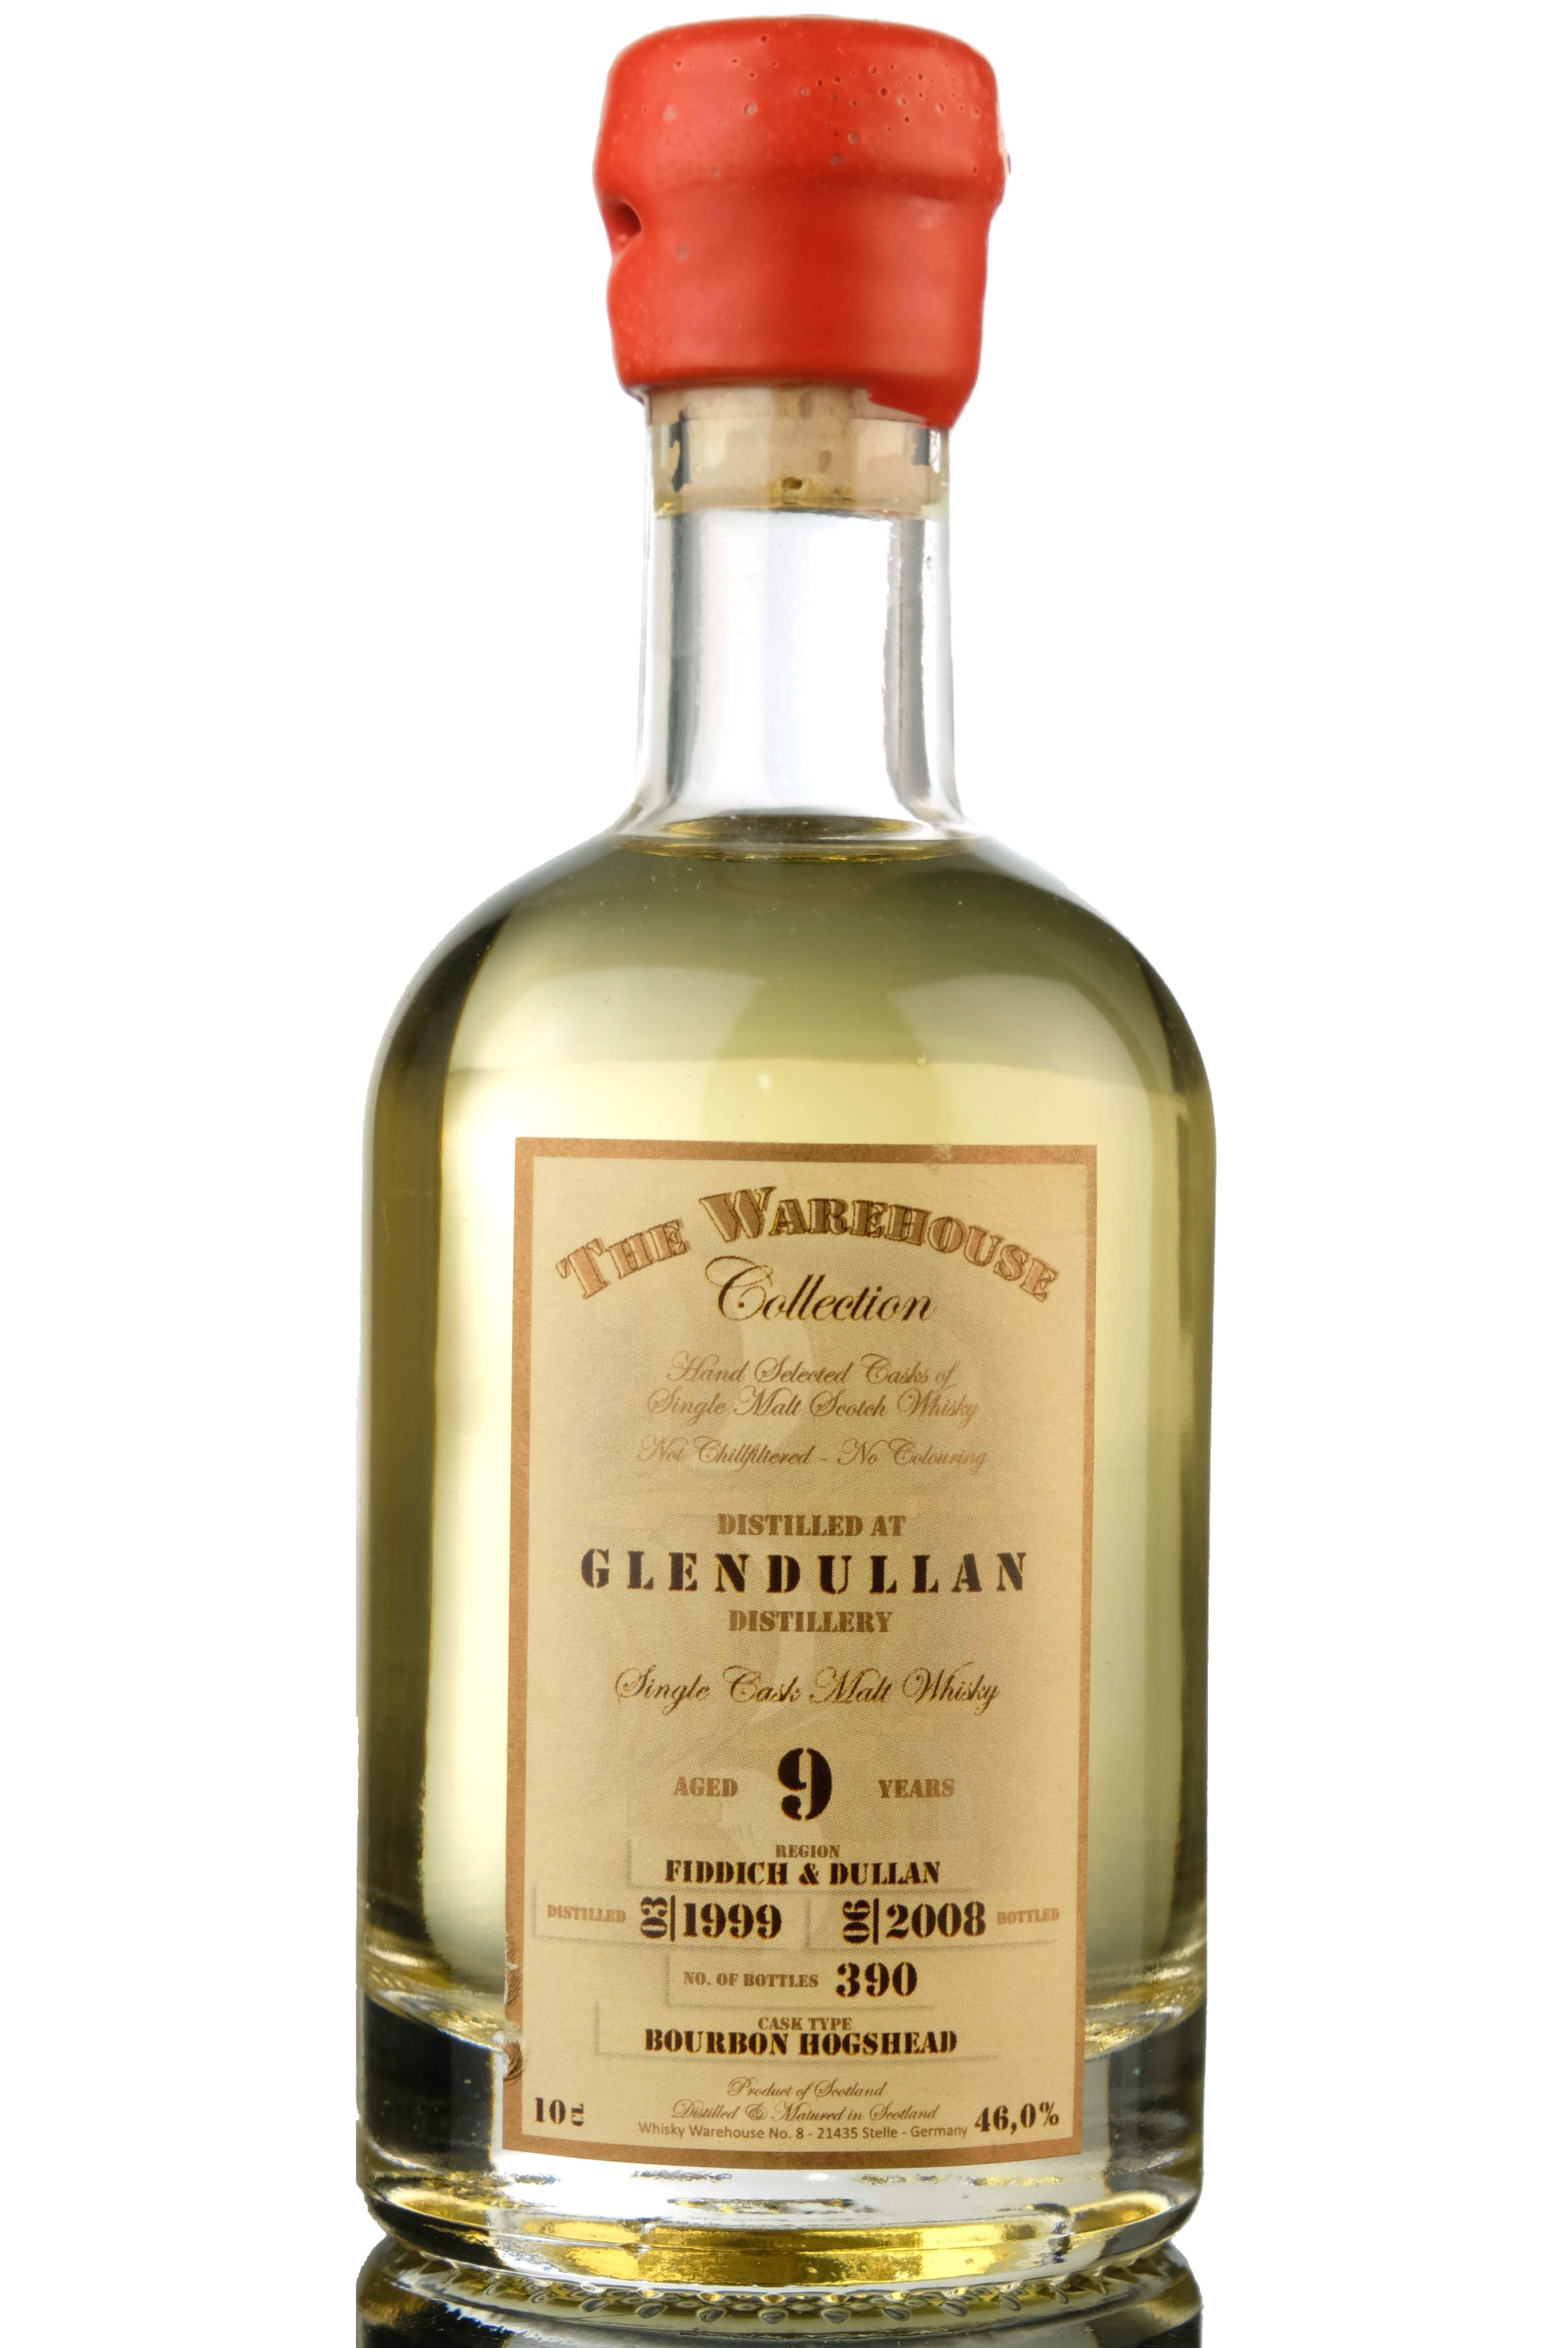 Glendullan Warehouse Collection 9 Year Old 10cl